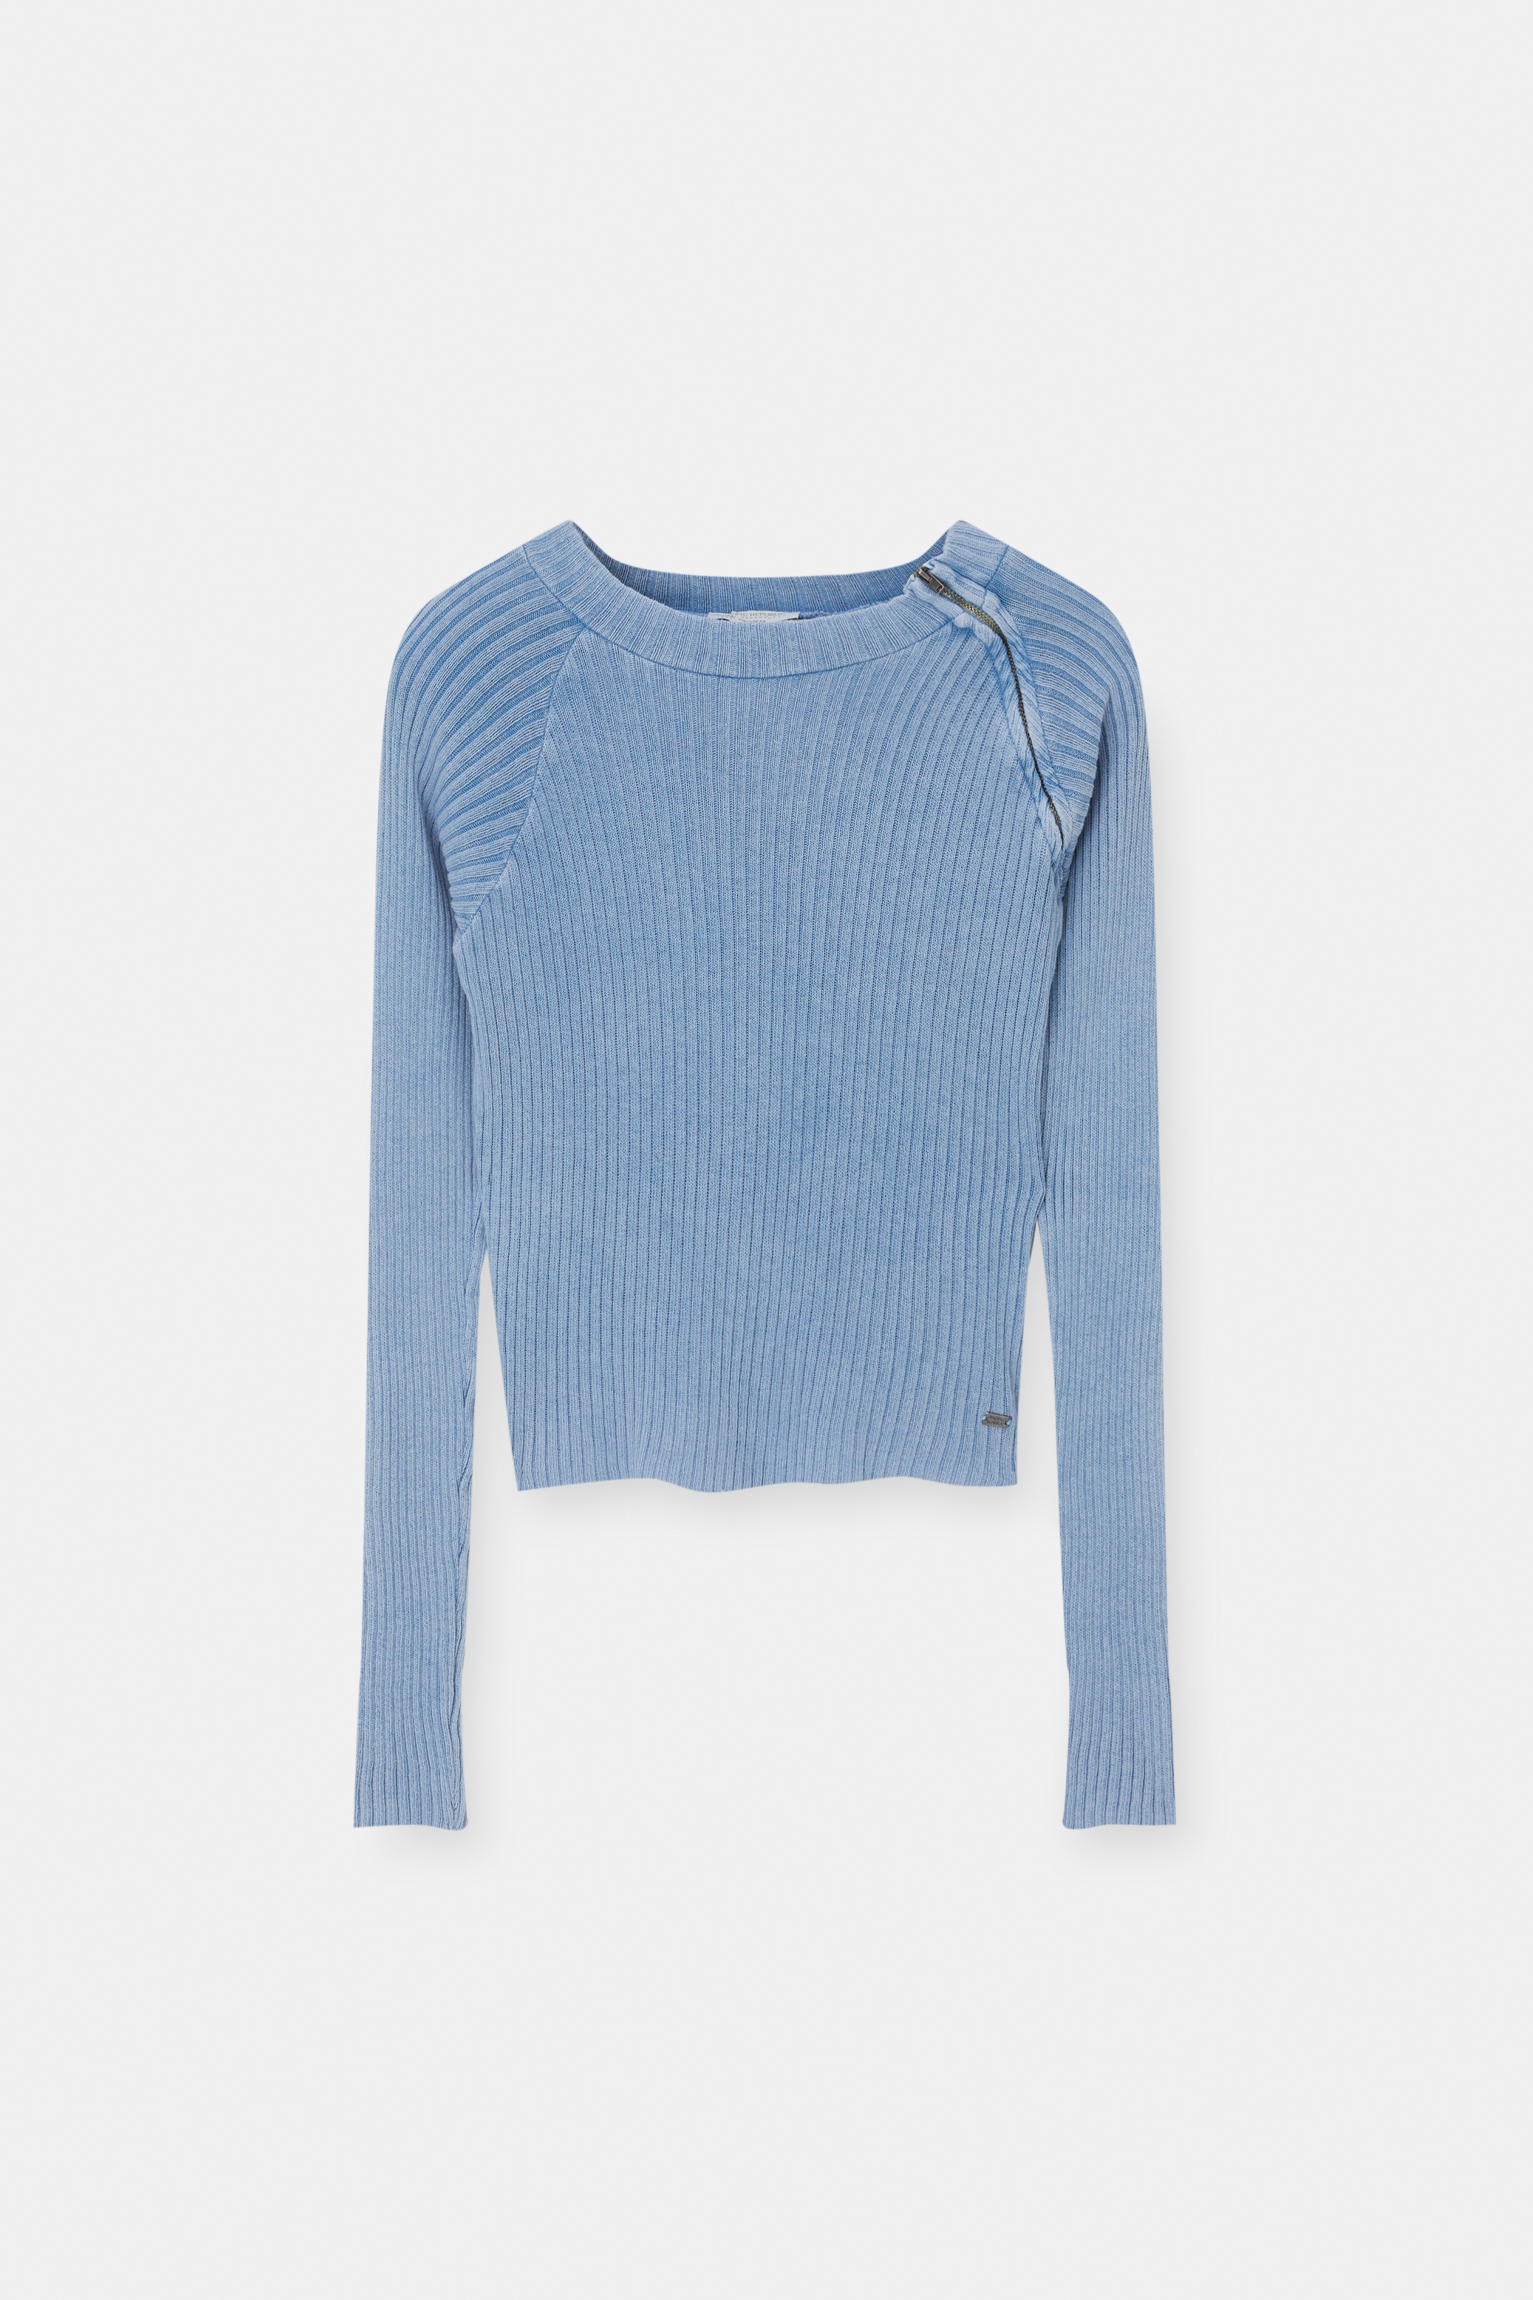 Knit sweater with zipper - pull&bear